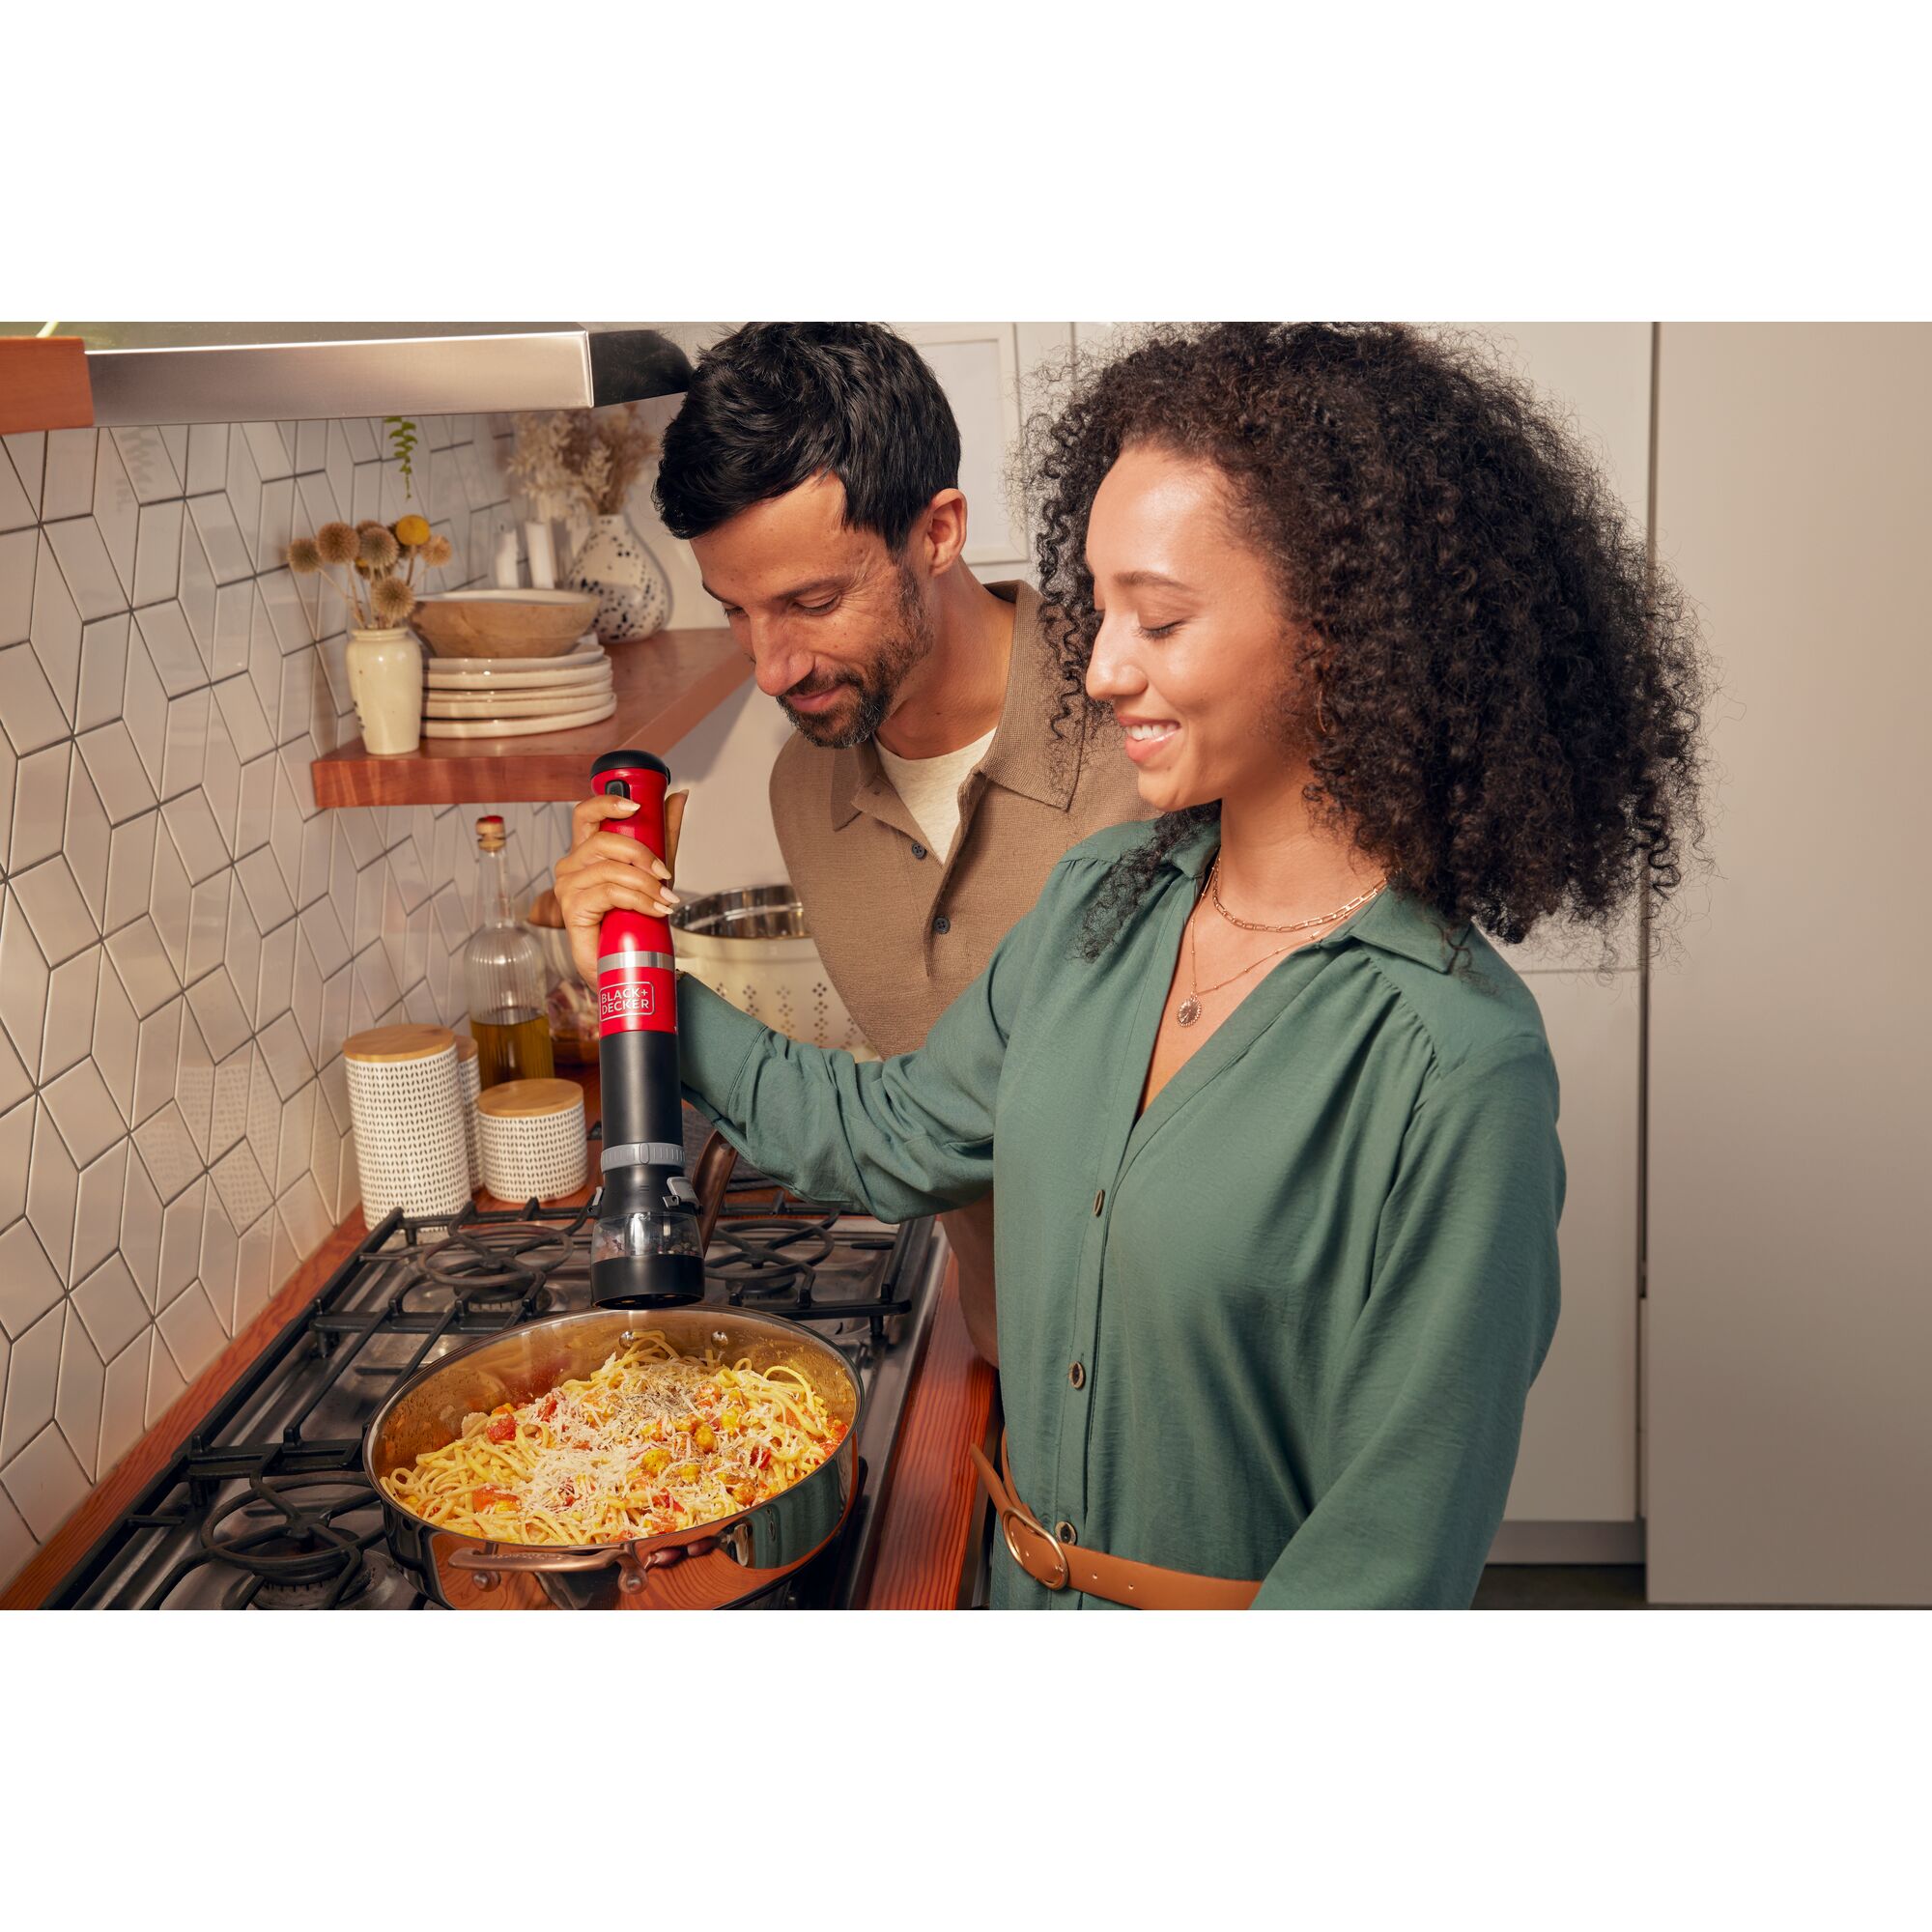 Talent using the red, BLACK+DECKER kitchen wand spice grinder to add spices to a pasta entr\xe9e